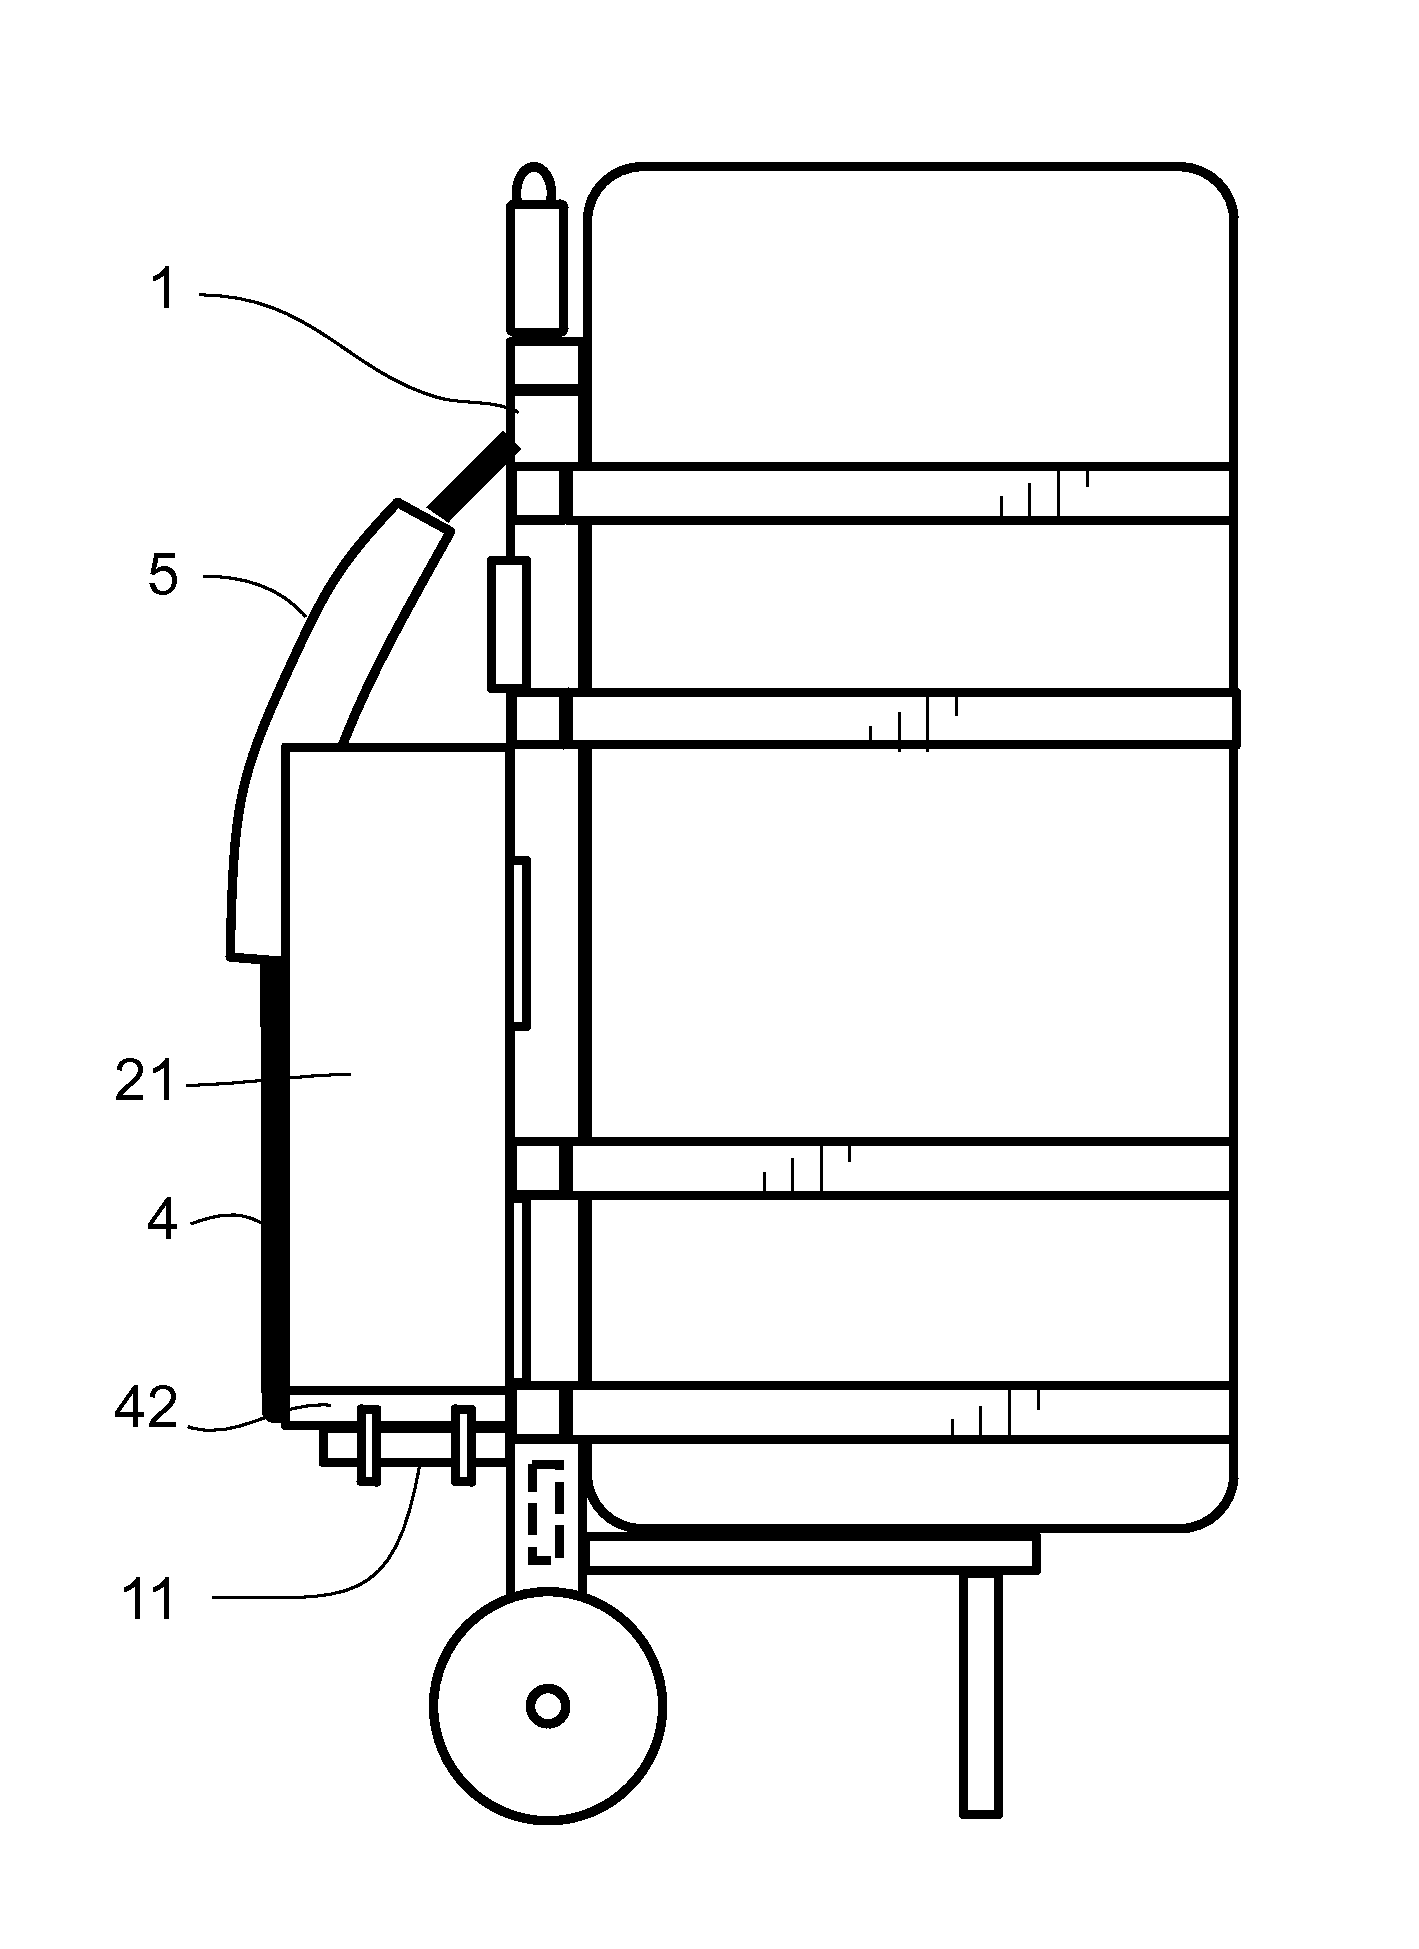 Shoulder-carriable wheeled cart assembly